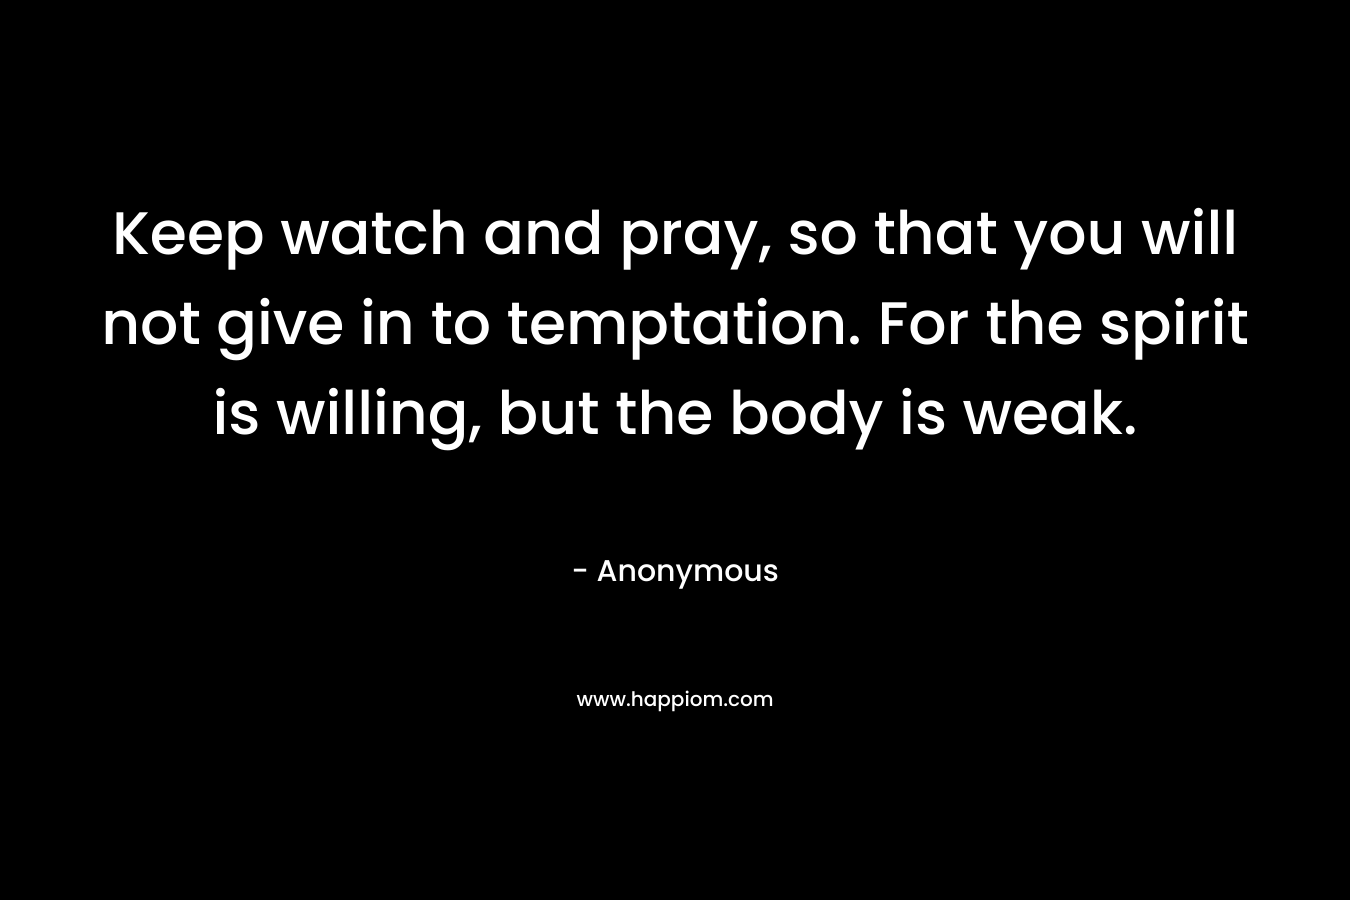 Keep watch and pray, so that you will not give in to temptation. For the spirit is willing, but the body is weak.